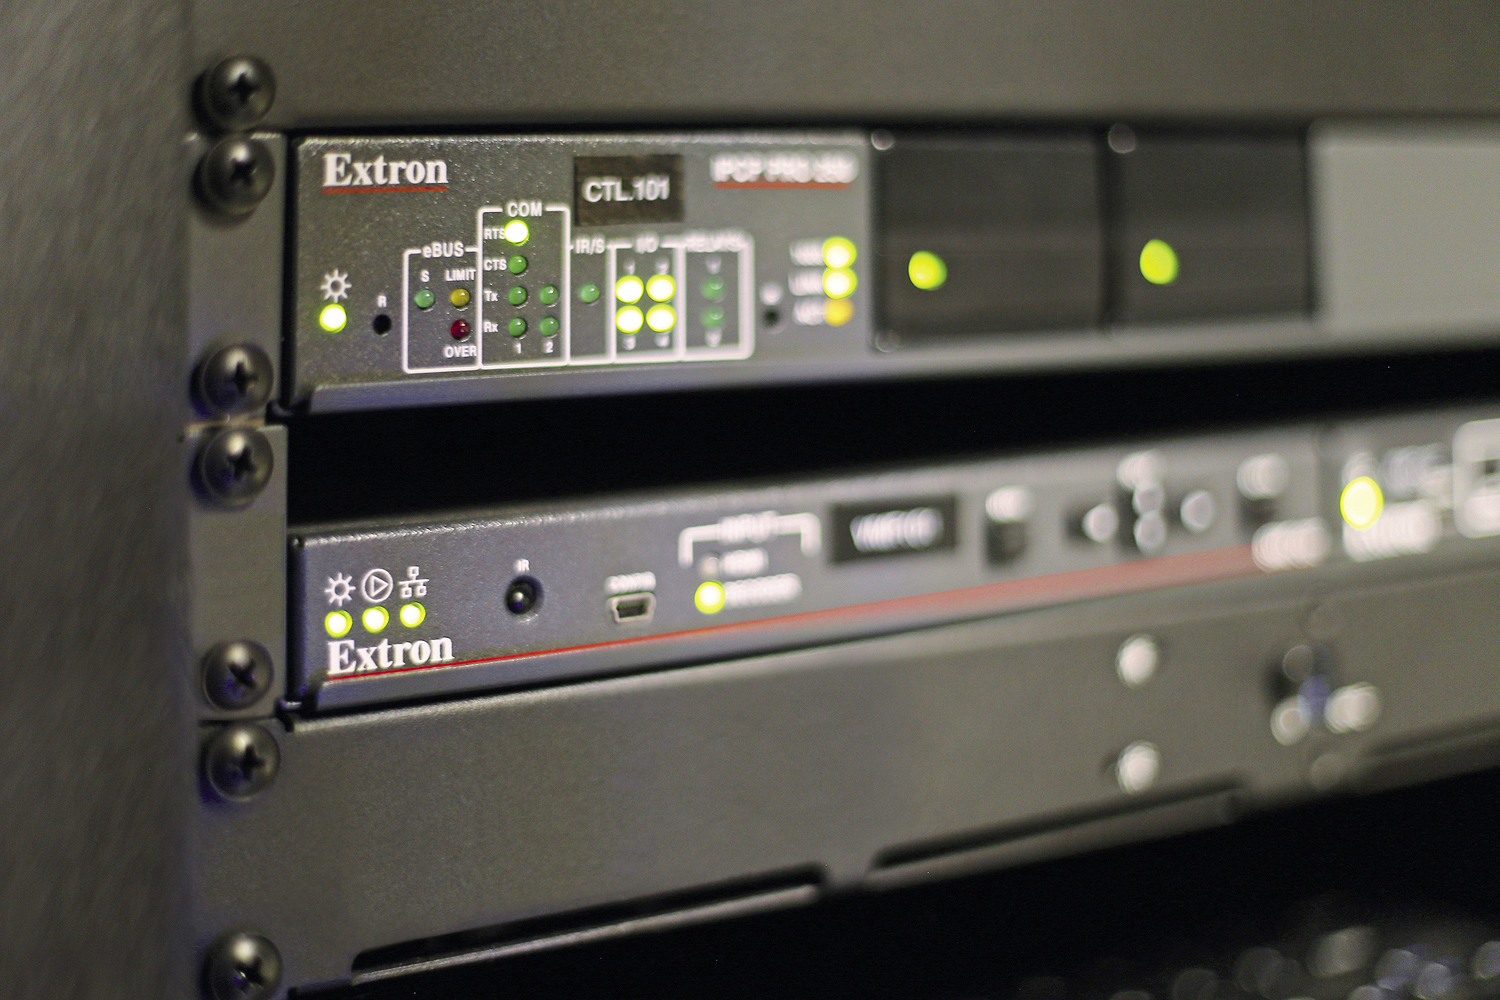 Control of the independent AV system is processed by a single unit, the Extron IPCP Pro 250.